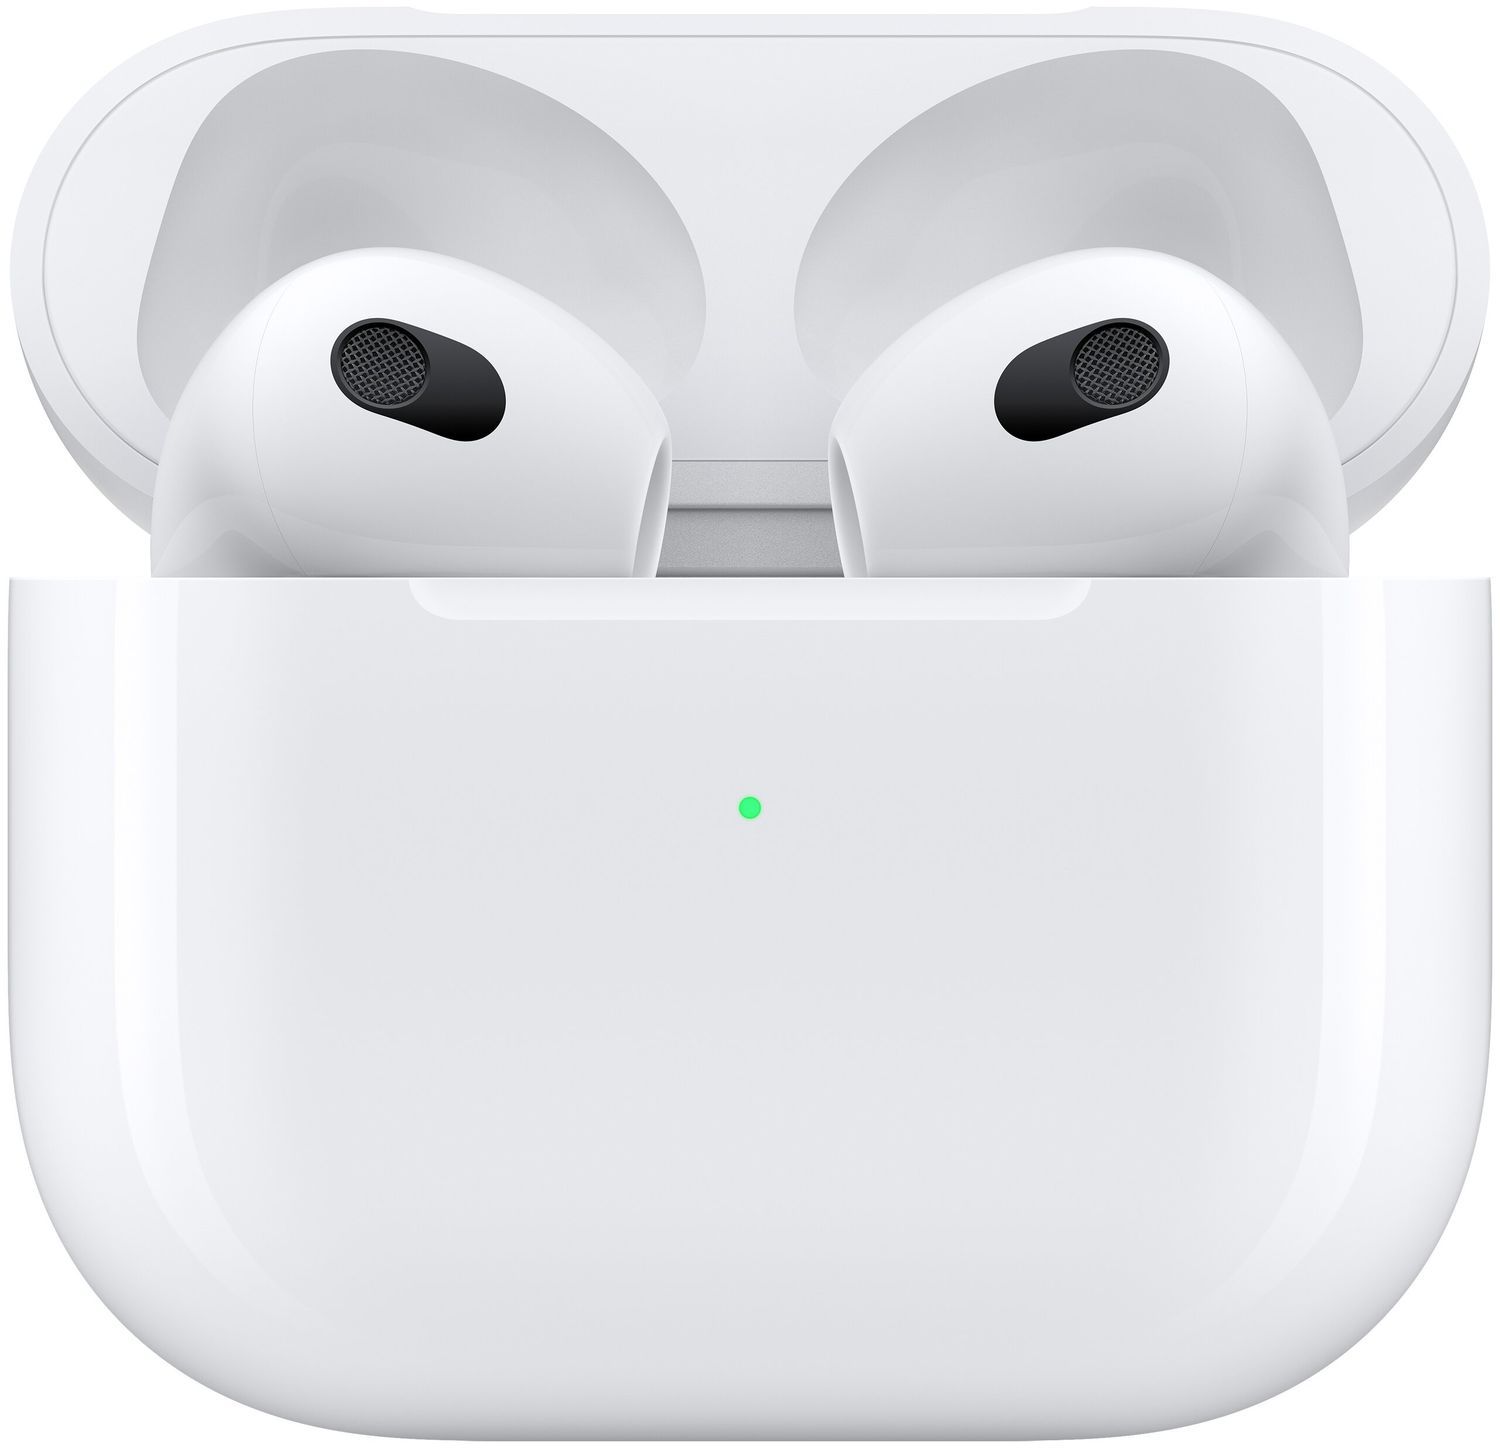 Наушники Apple AirPods 3 MagSafe Charging Case, белый MME73 беспроводные наушники apple airpods pro 2 magsafe charging case usb c